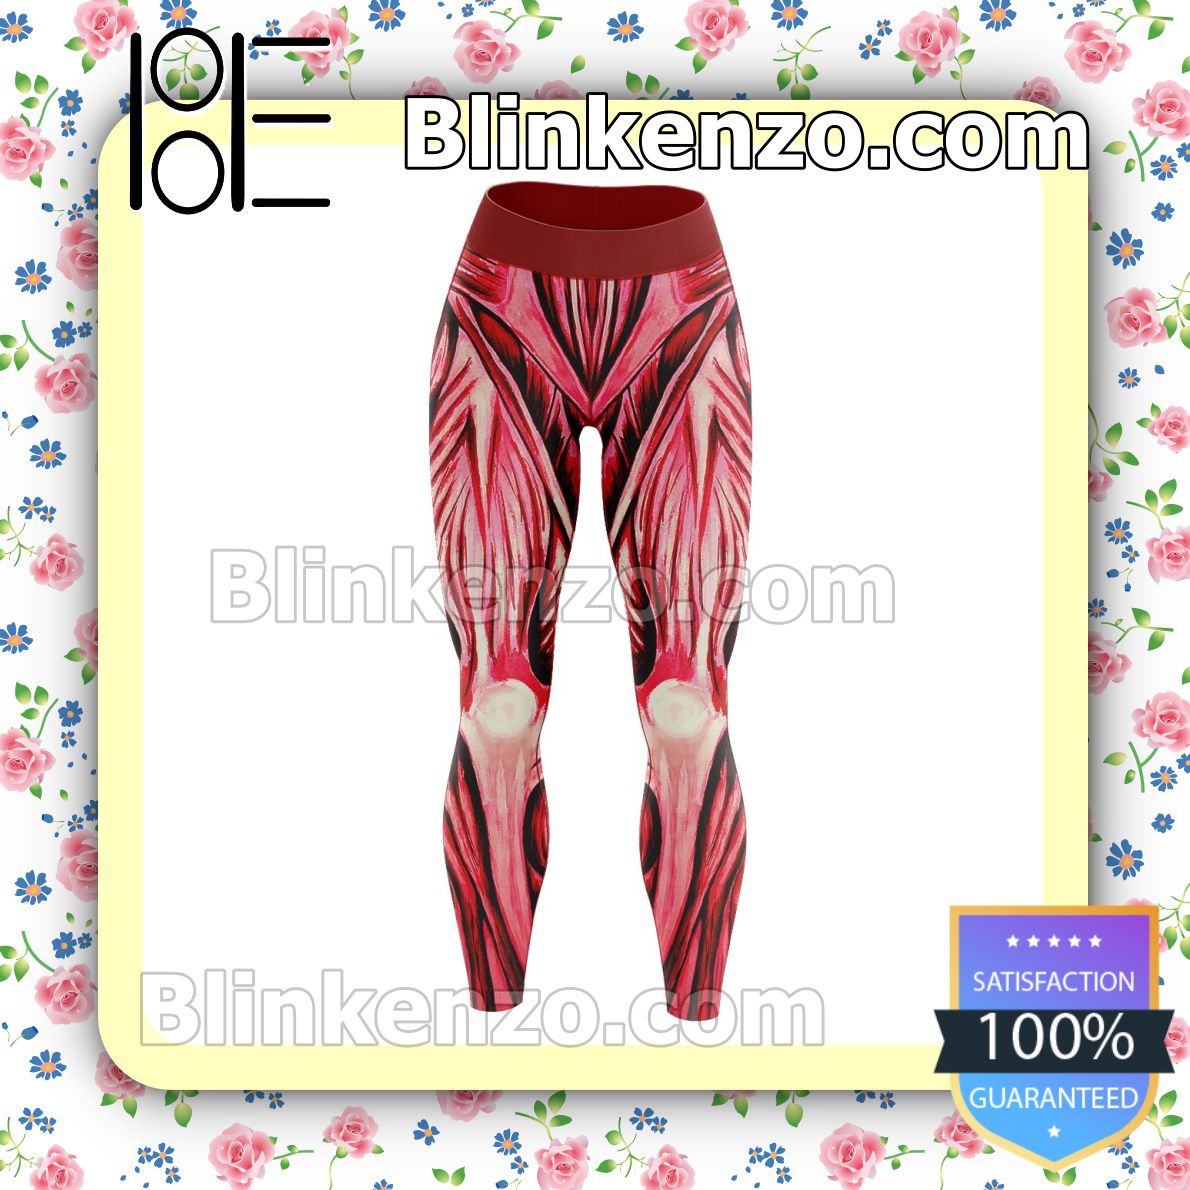 Top Rated Colossal Titan Attack On Titan Anime Workout Leggings